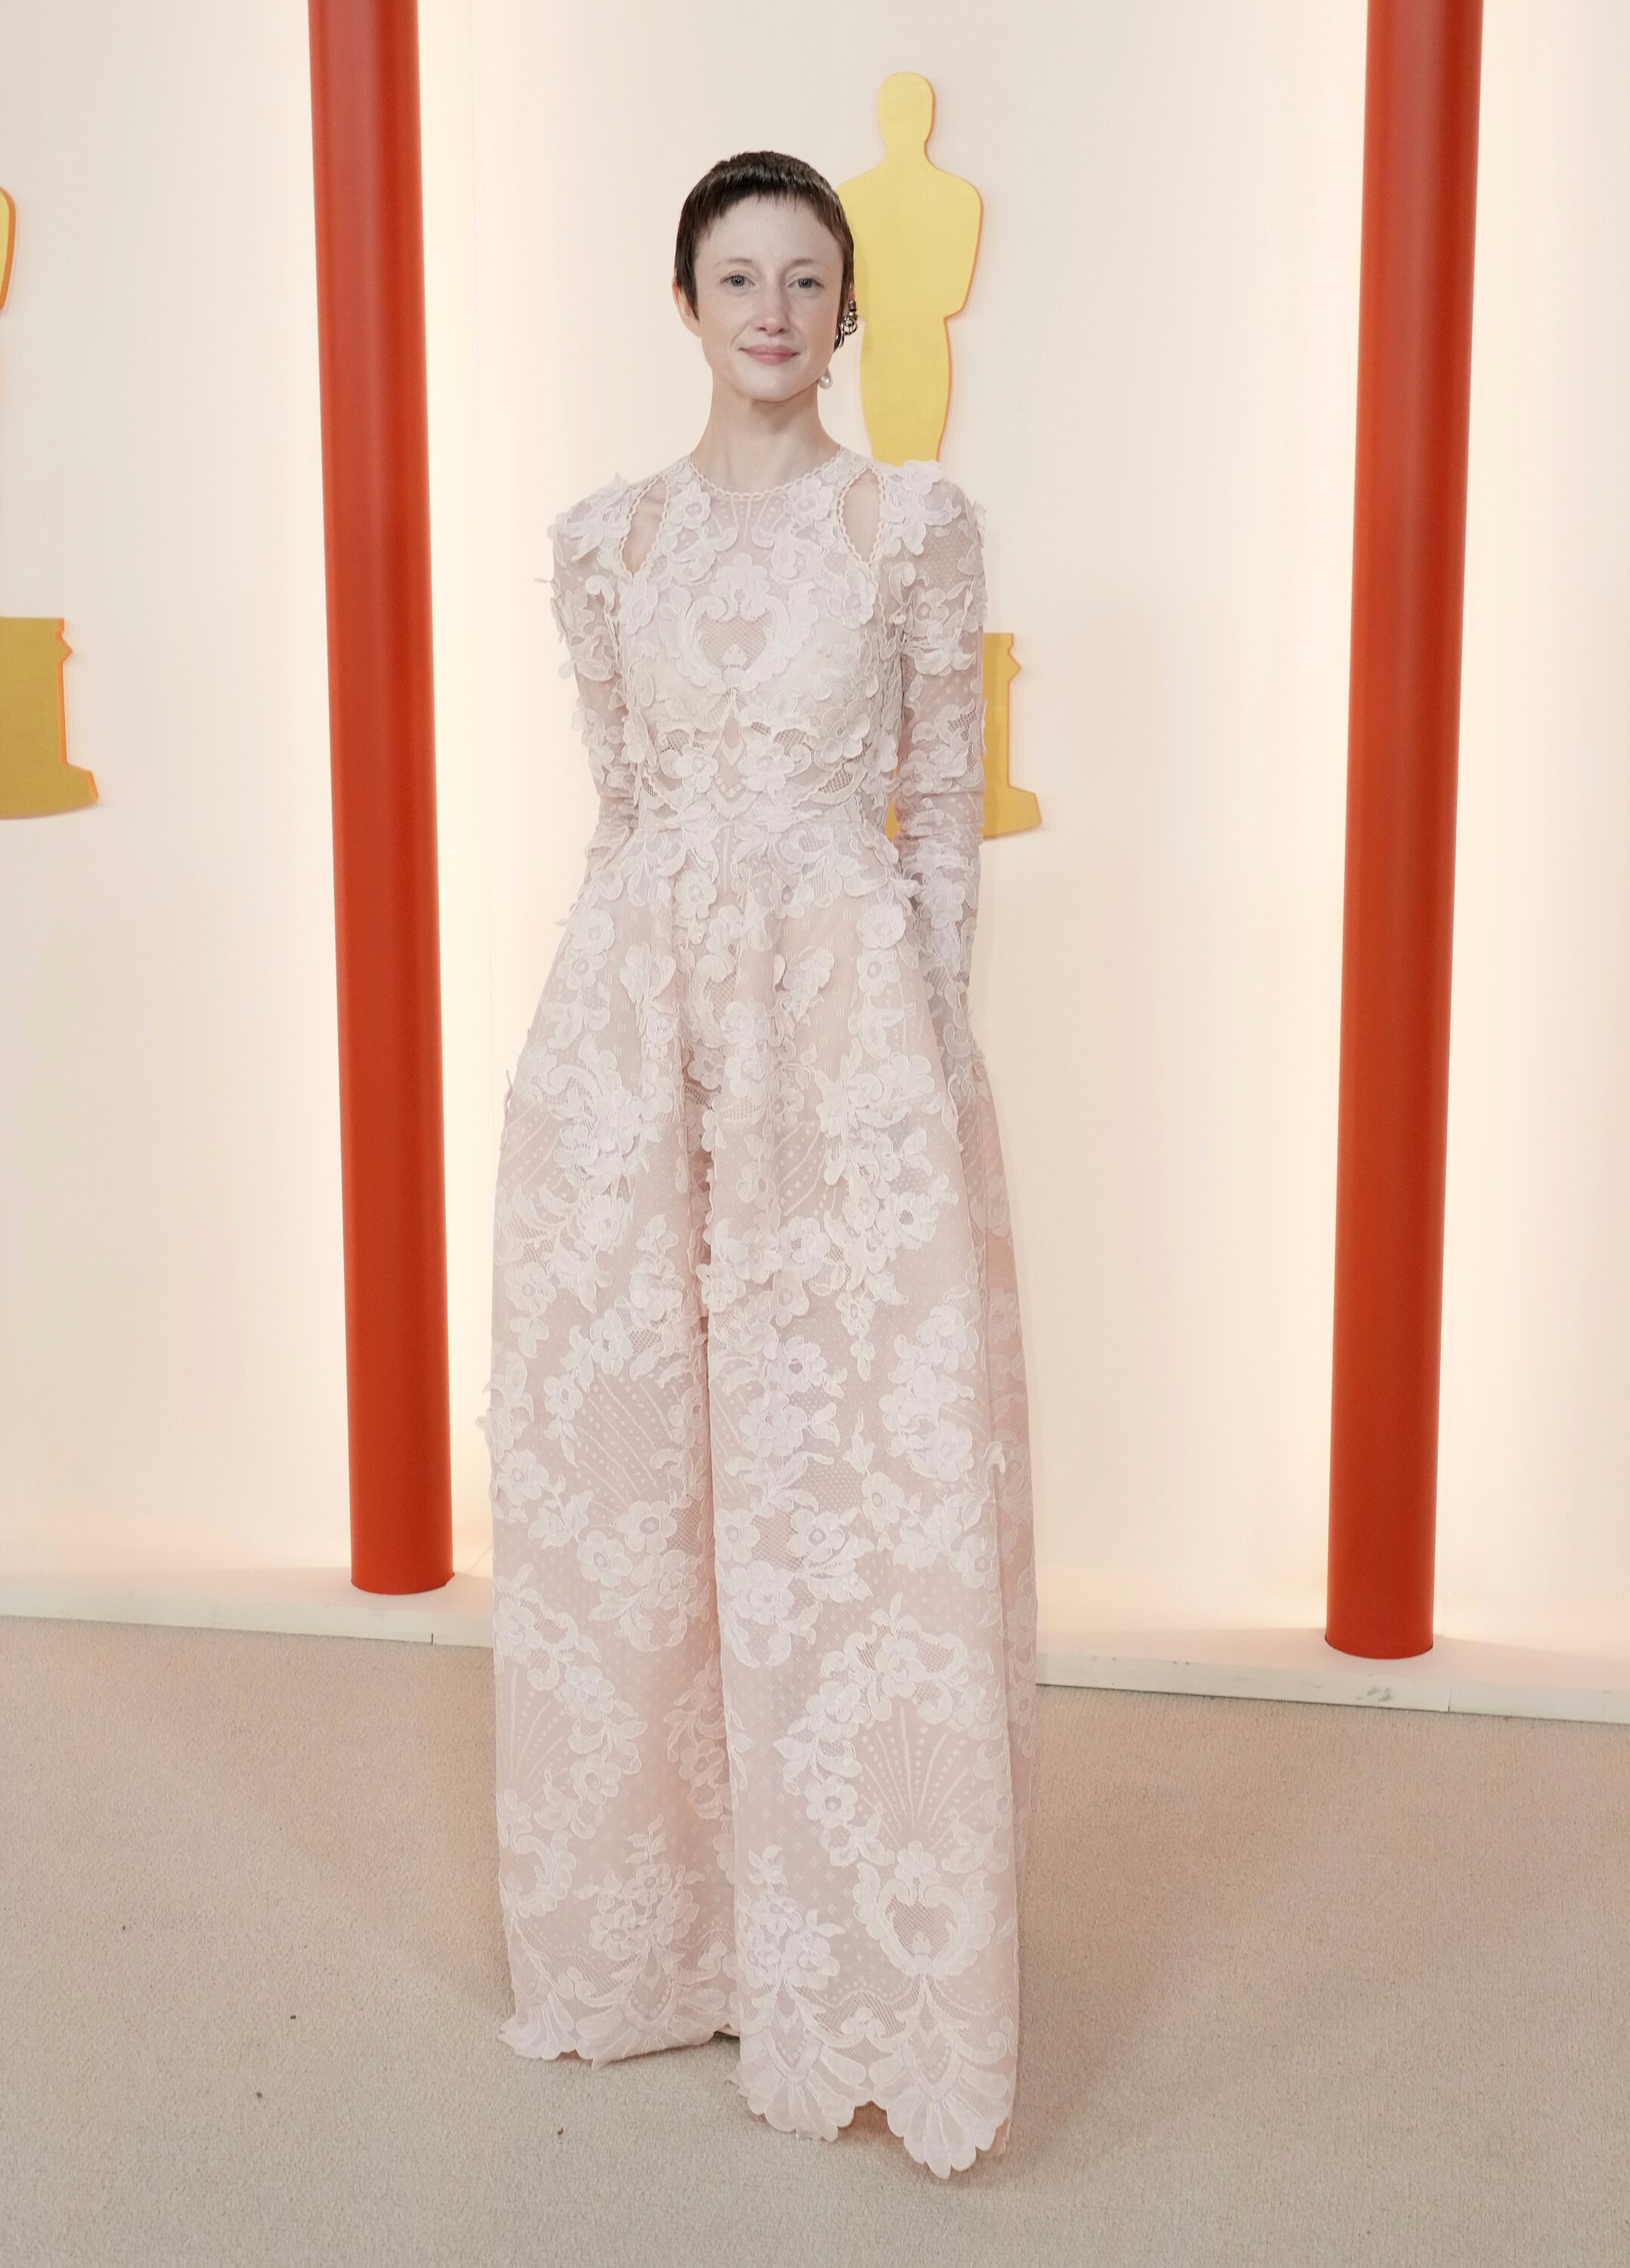 Andrea Riseborough wearing a long-sleeved, floor-length lacey beige gown